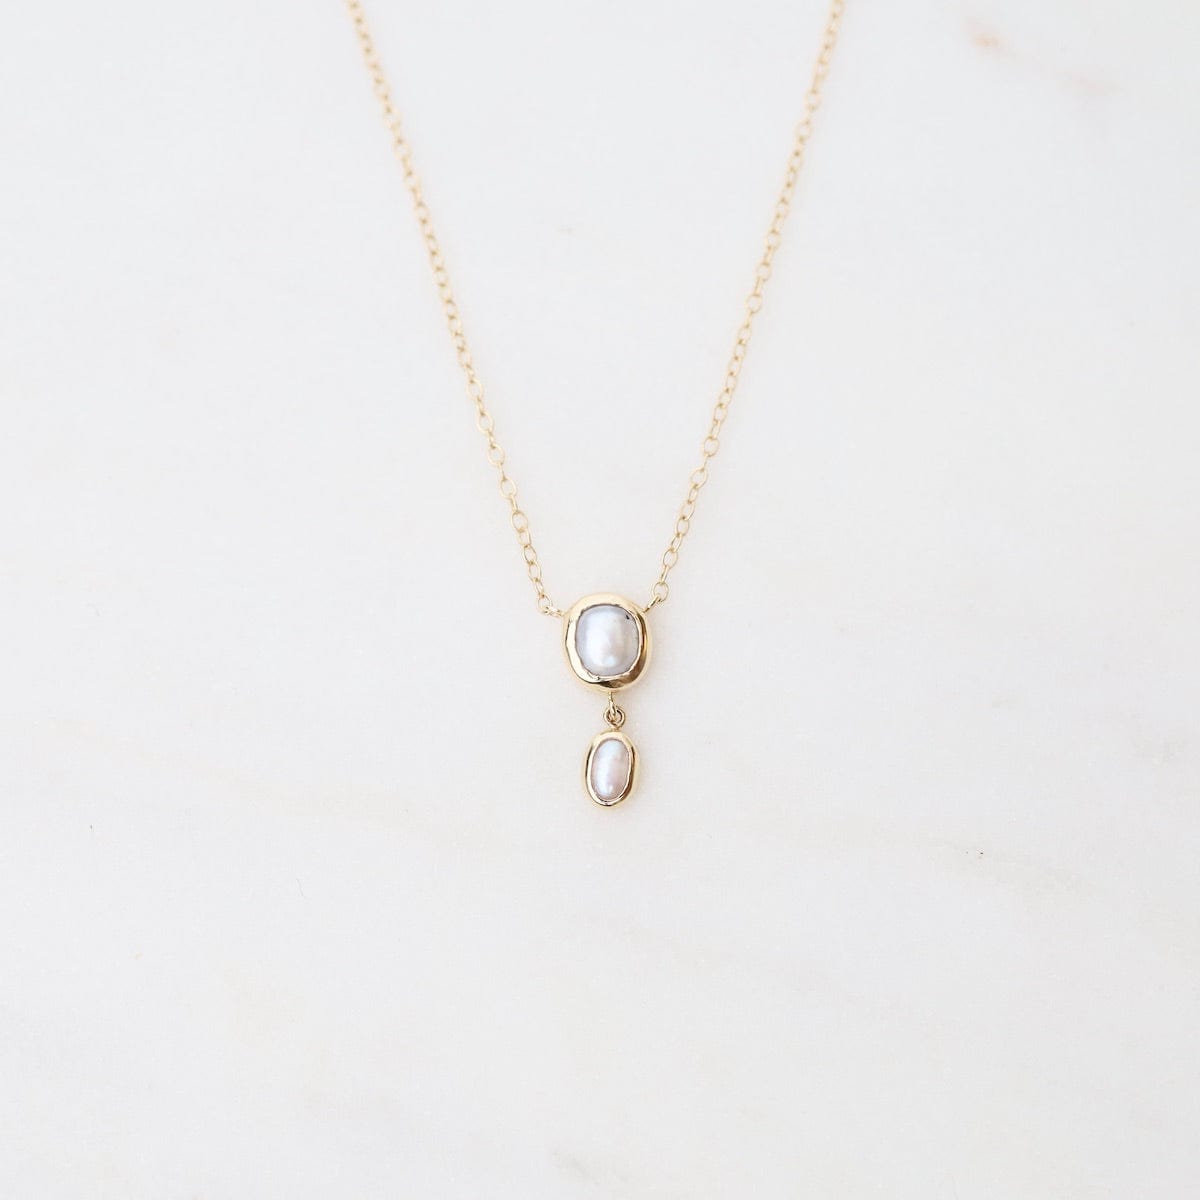 NKL-14K 14k Yellow Gold Bezel Set White Pearl with Tiny Drop Necklace